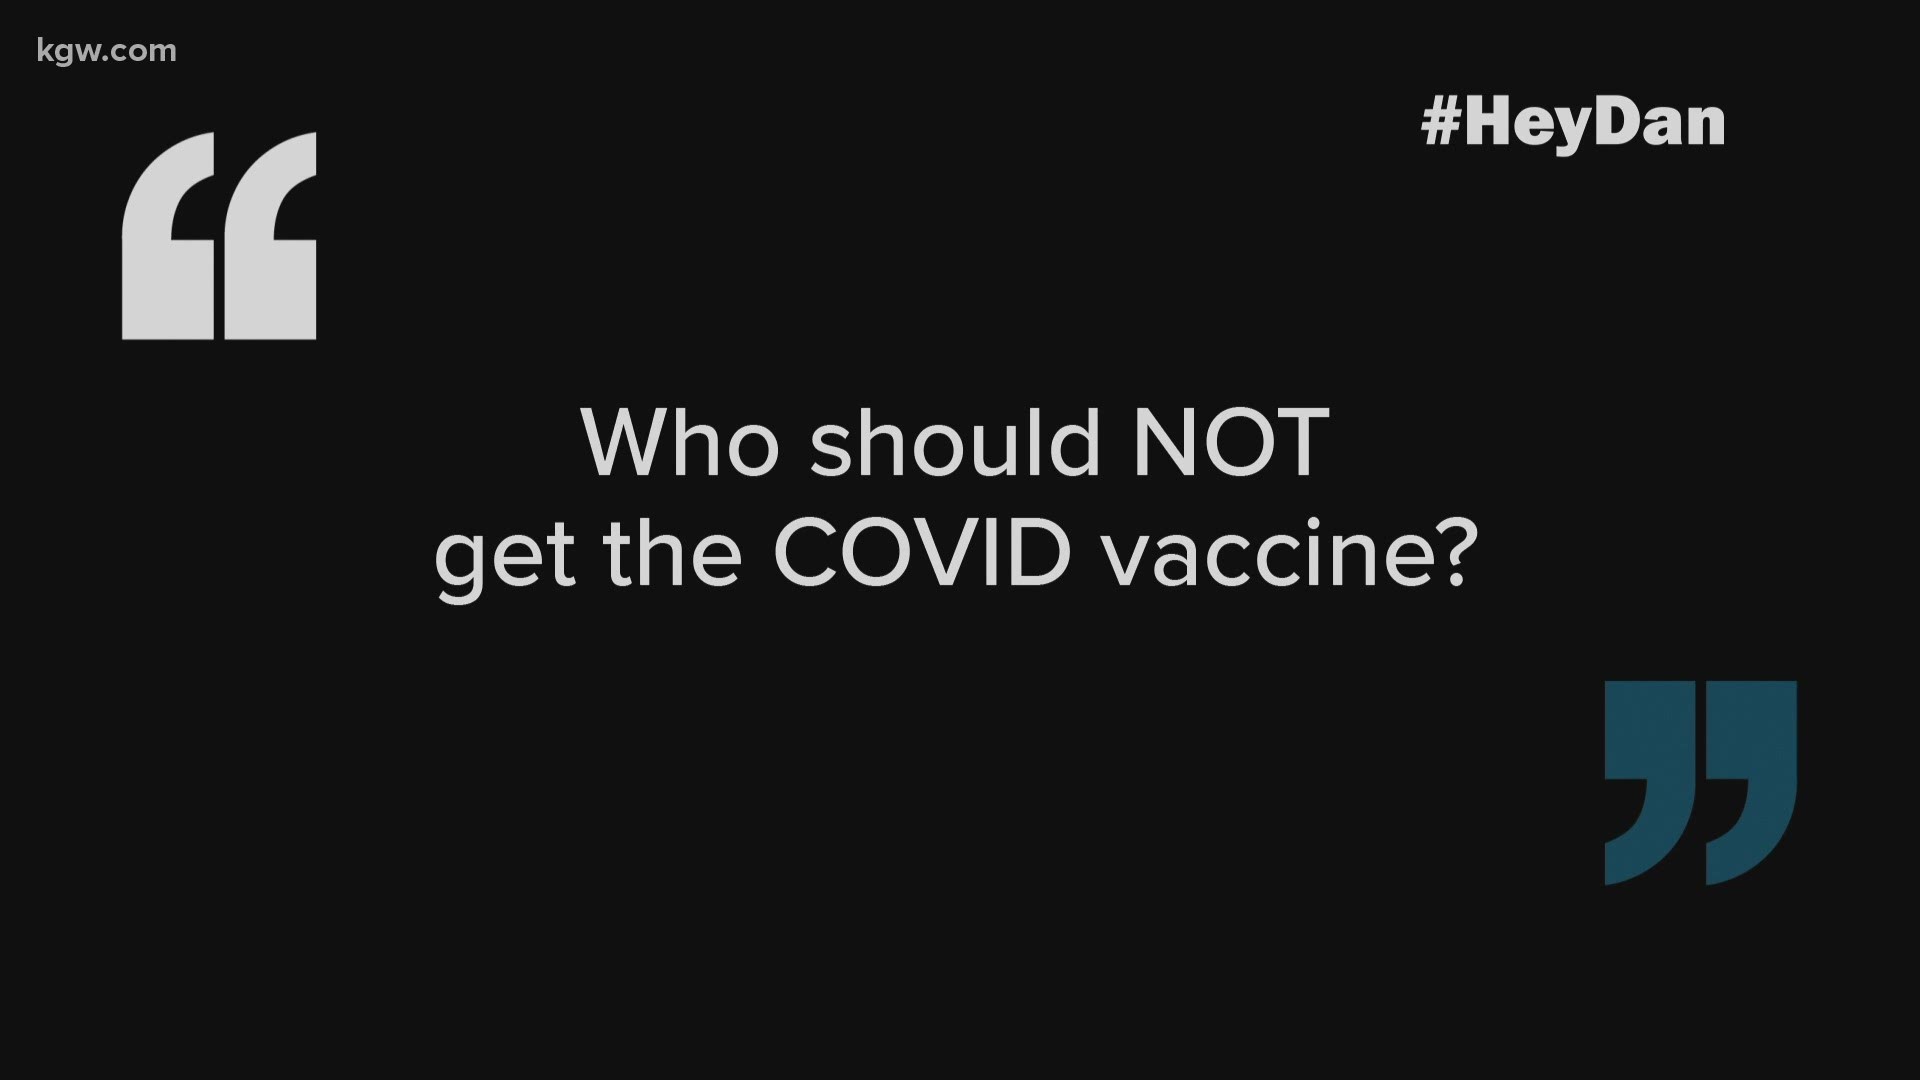 While most people are encouraged to get vaccinated, the CDC says people who've had an allergic reaction to any ingredients in the COVID-19 vaccines should not.